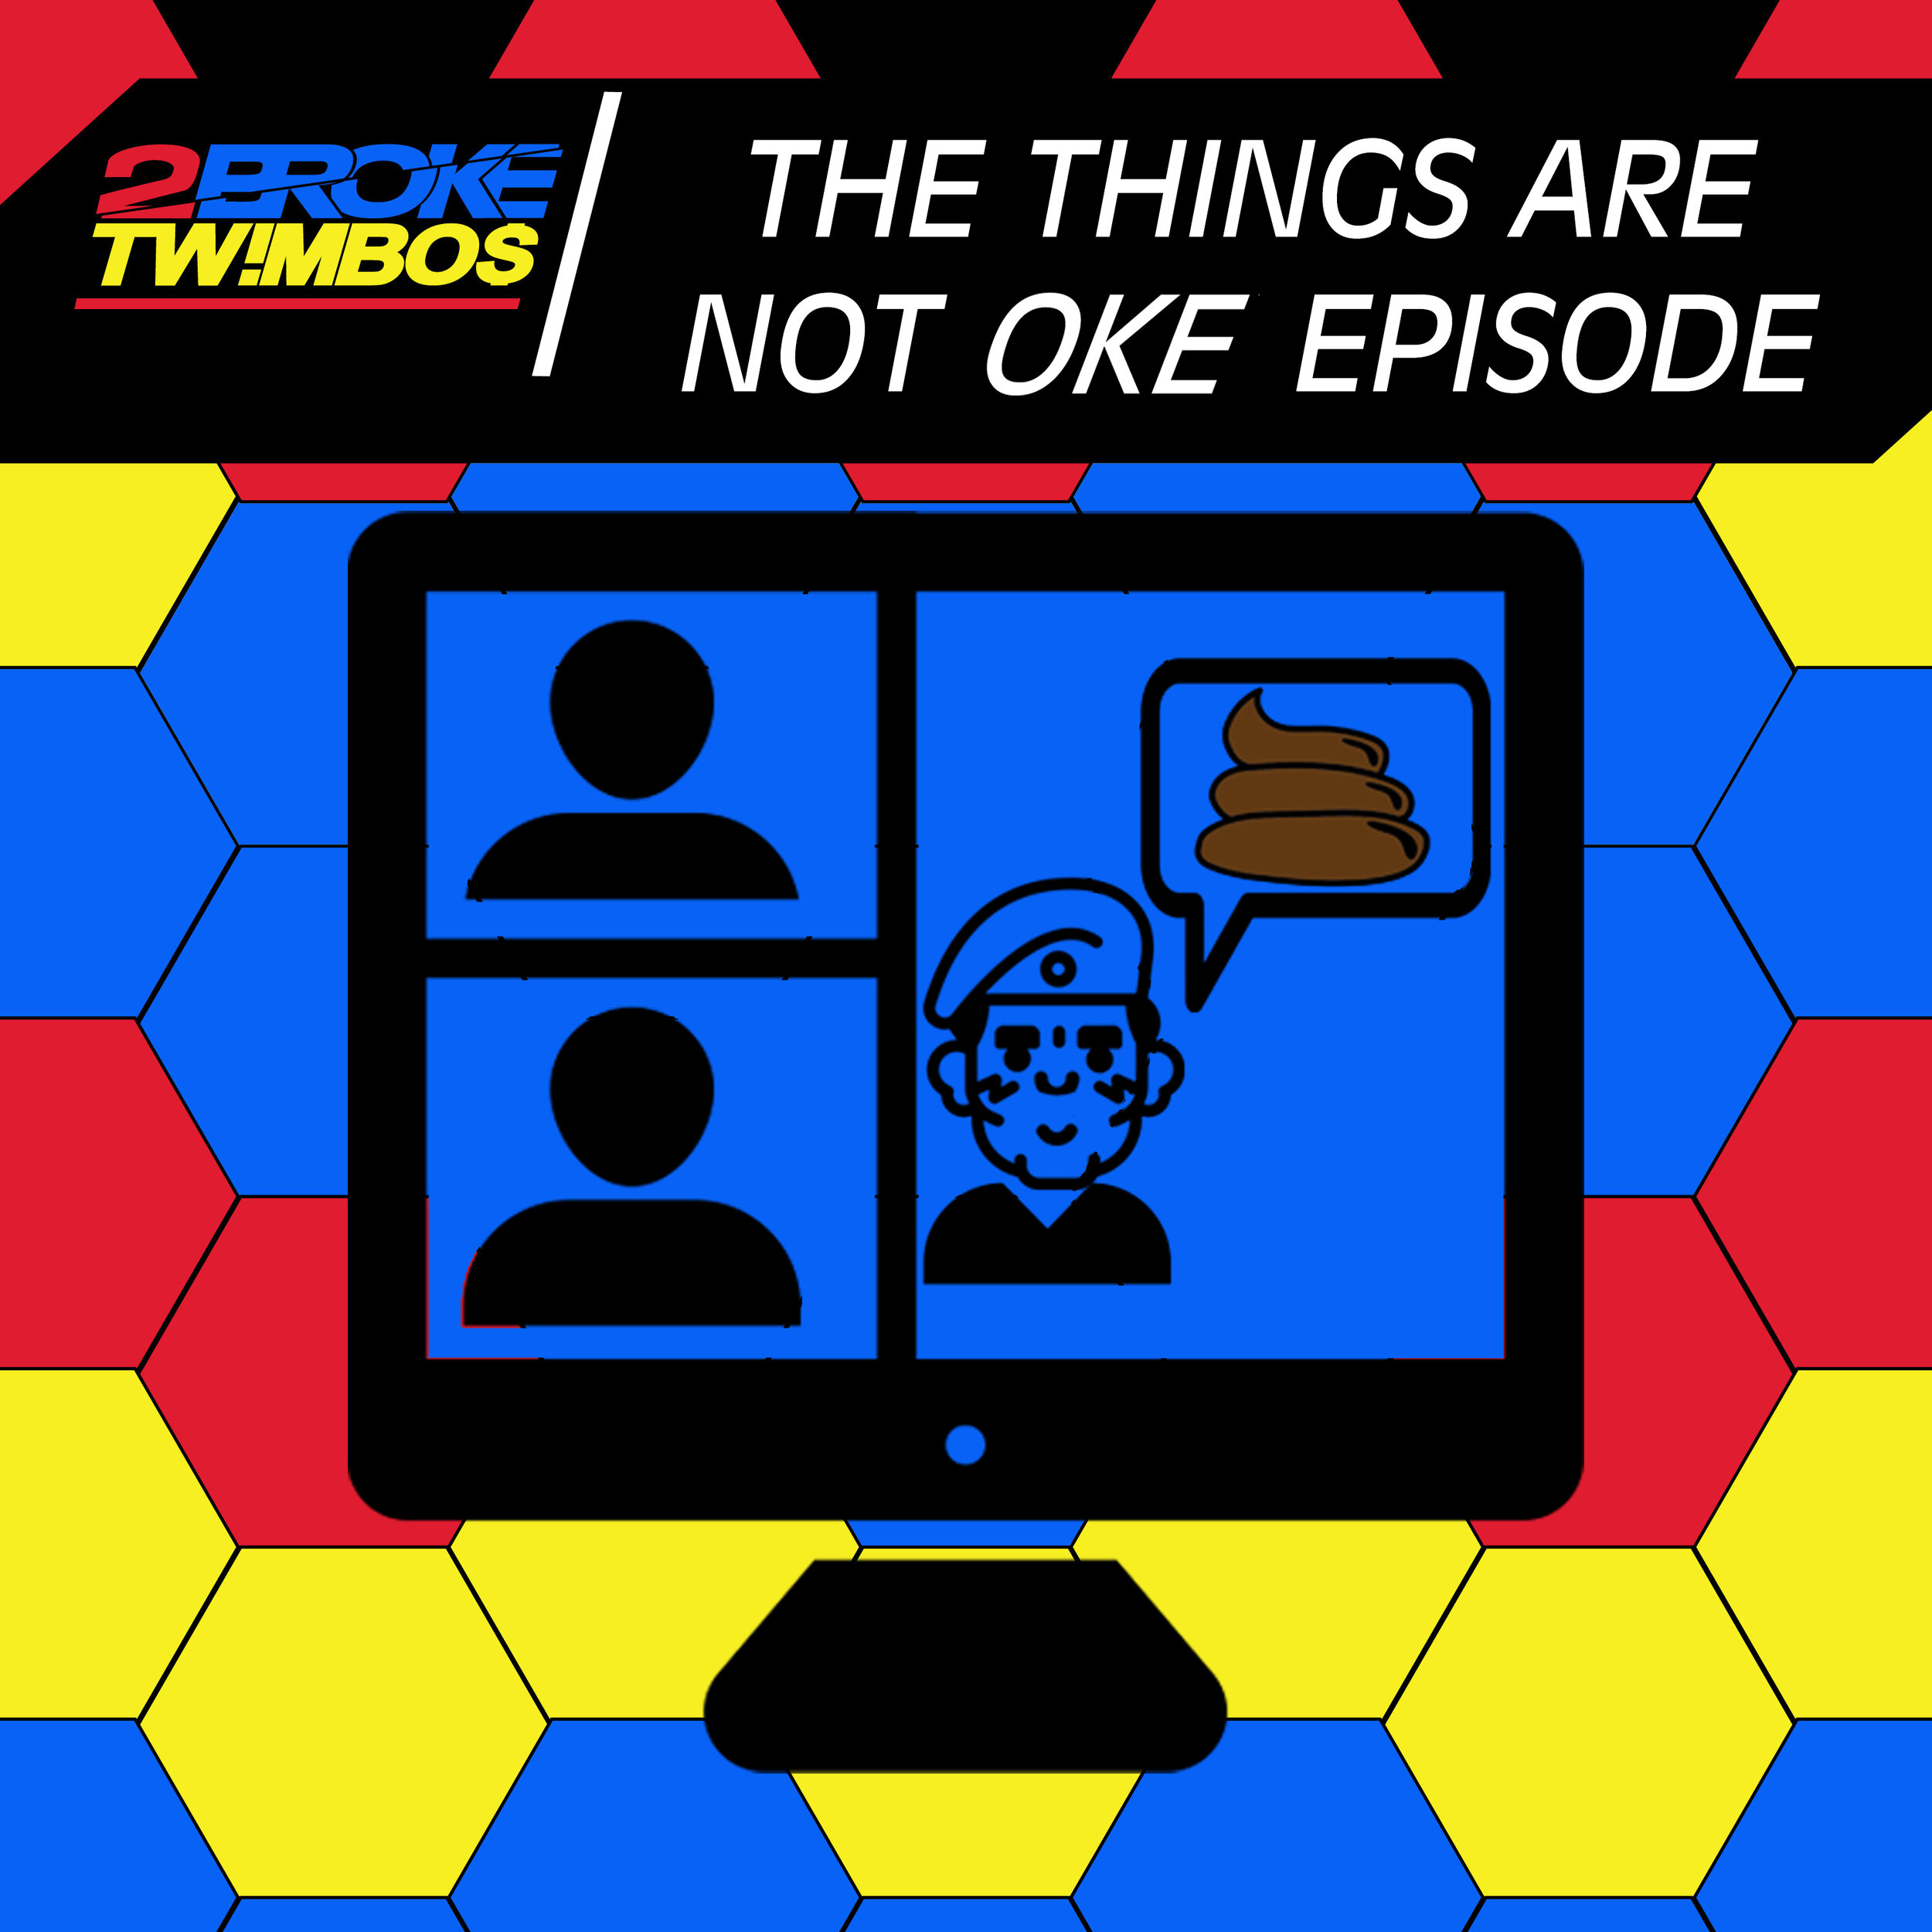 The Things Are Not Oke Episode